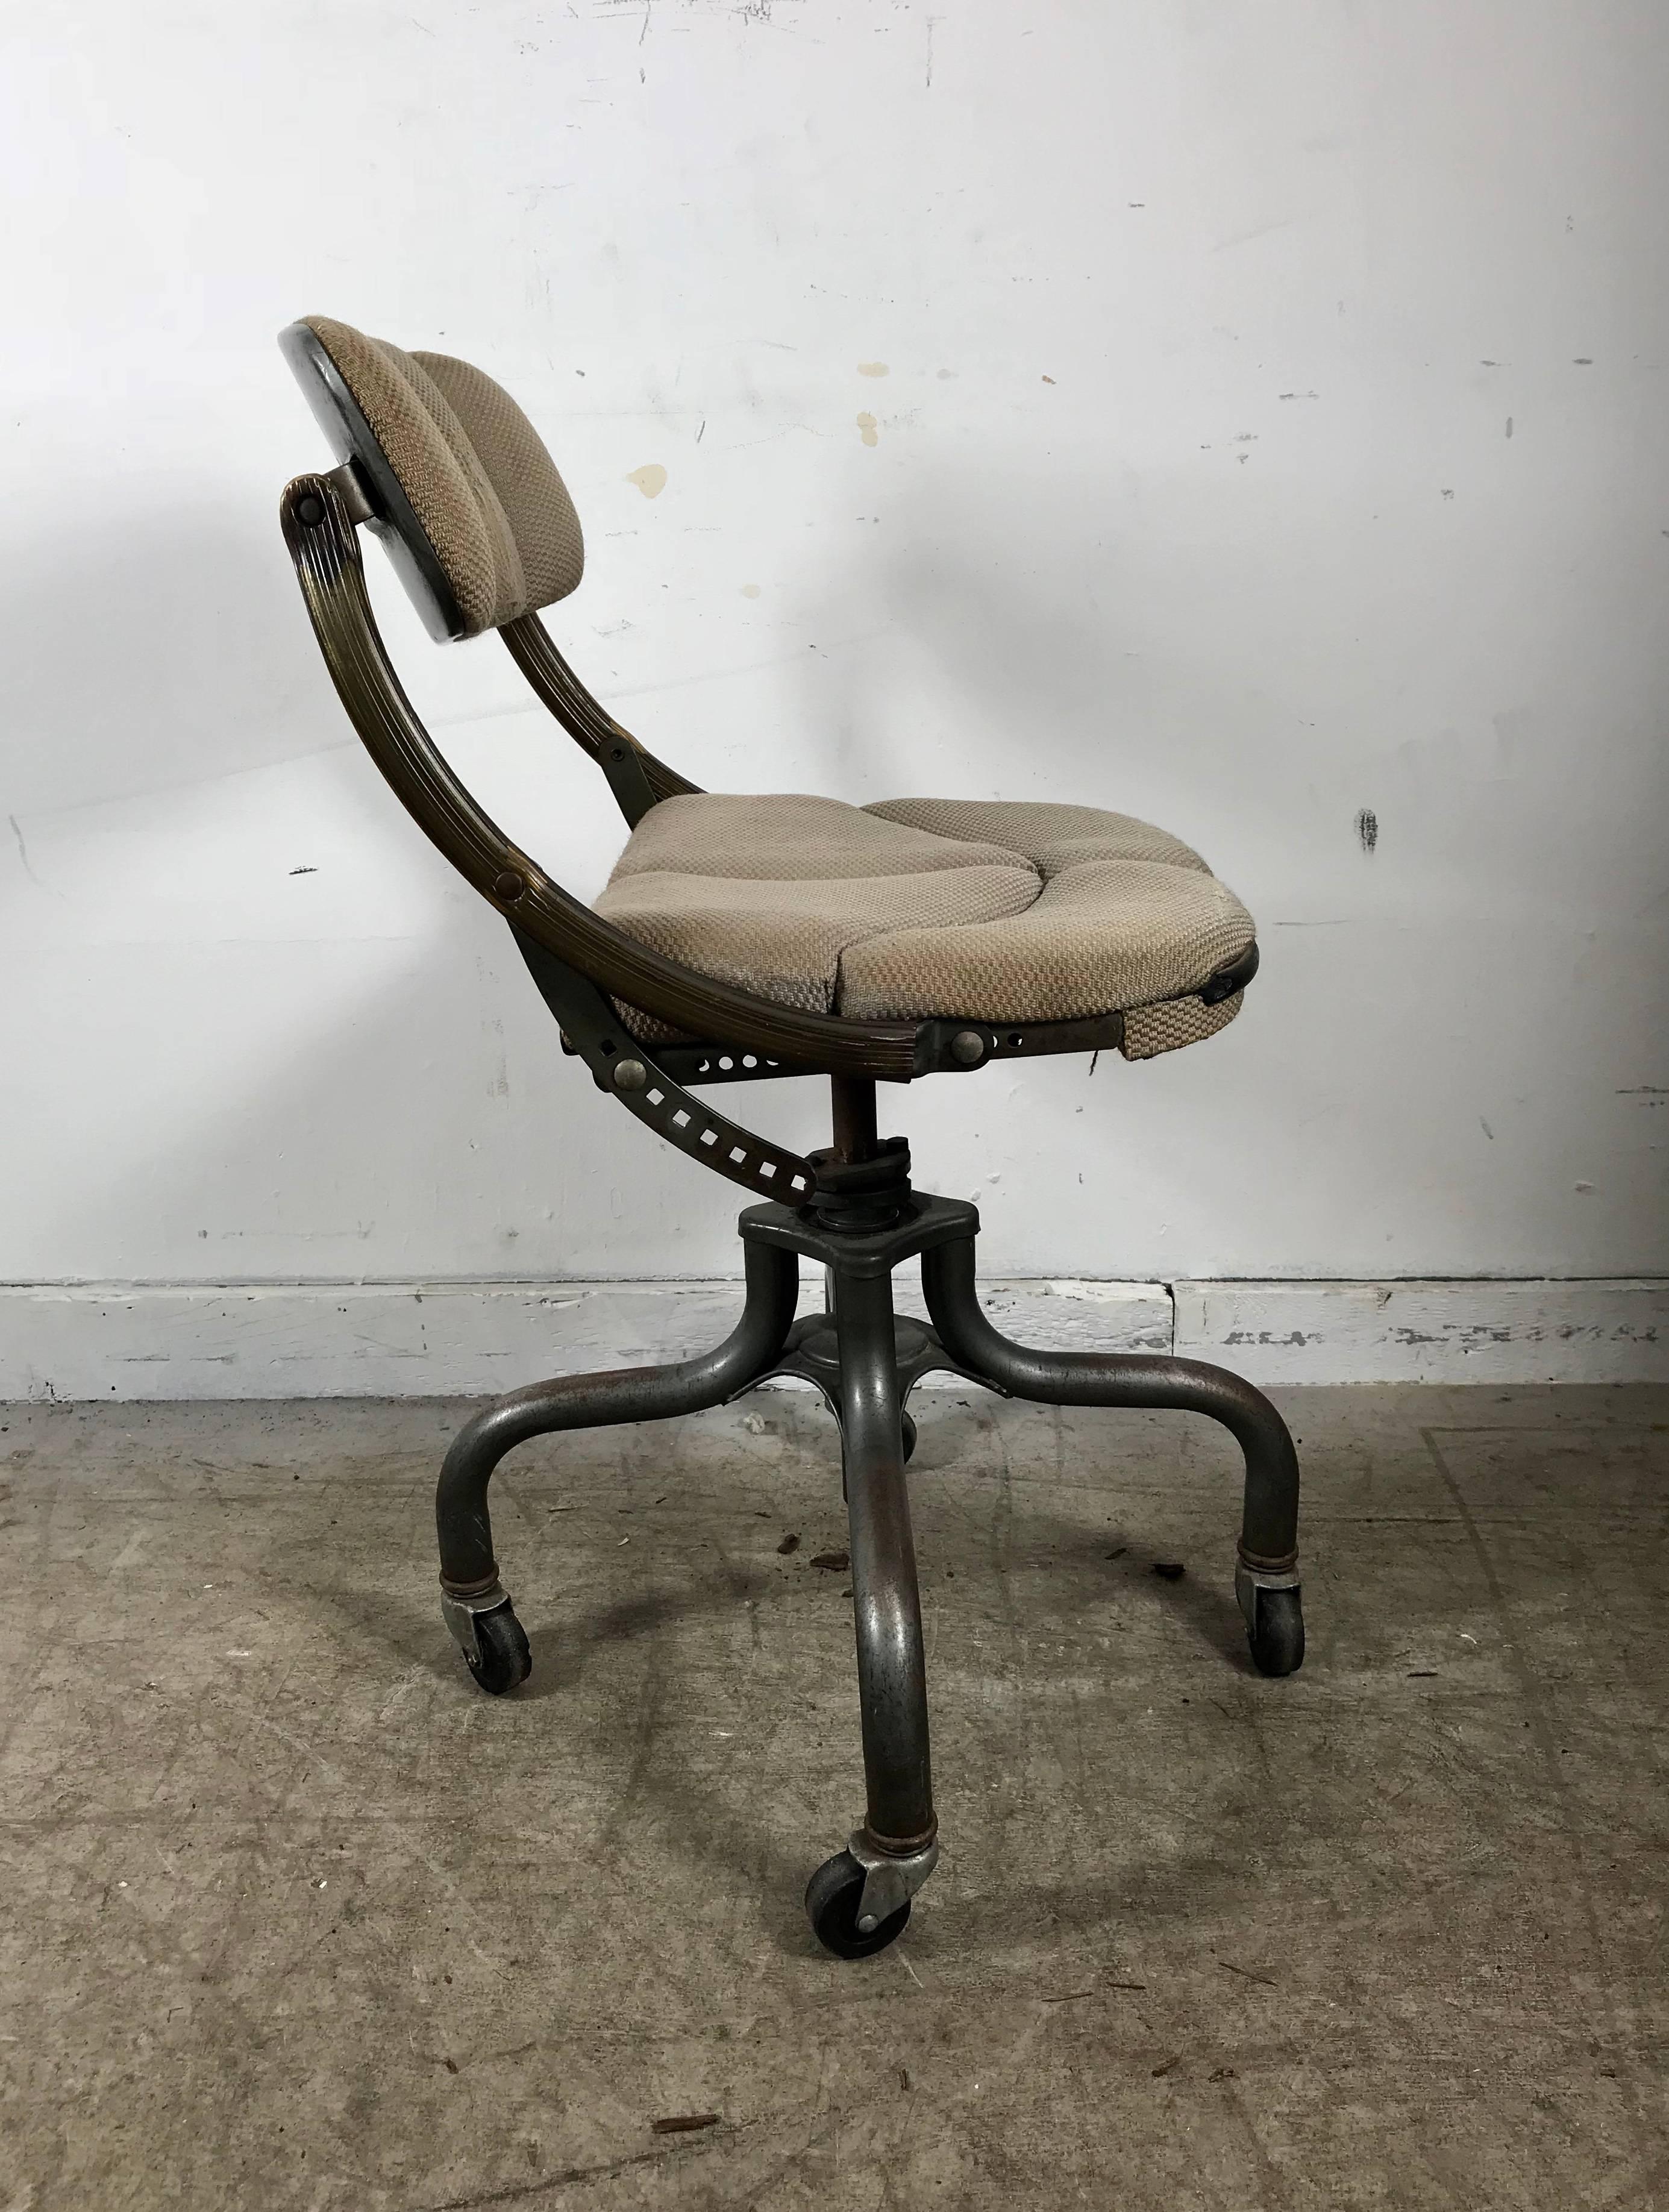 American Early Antique Industrial Adjustable Rolling Desk Chair by DoMore